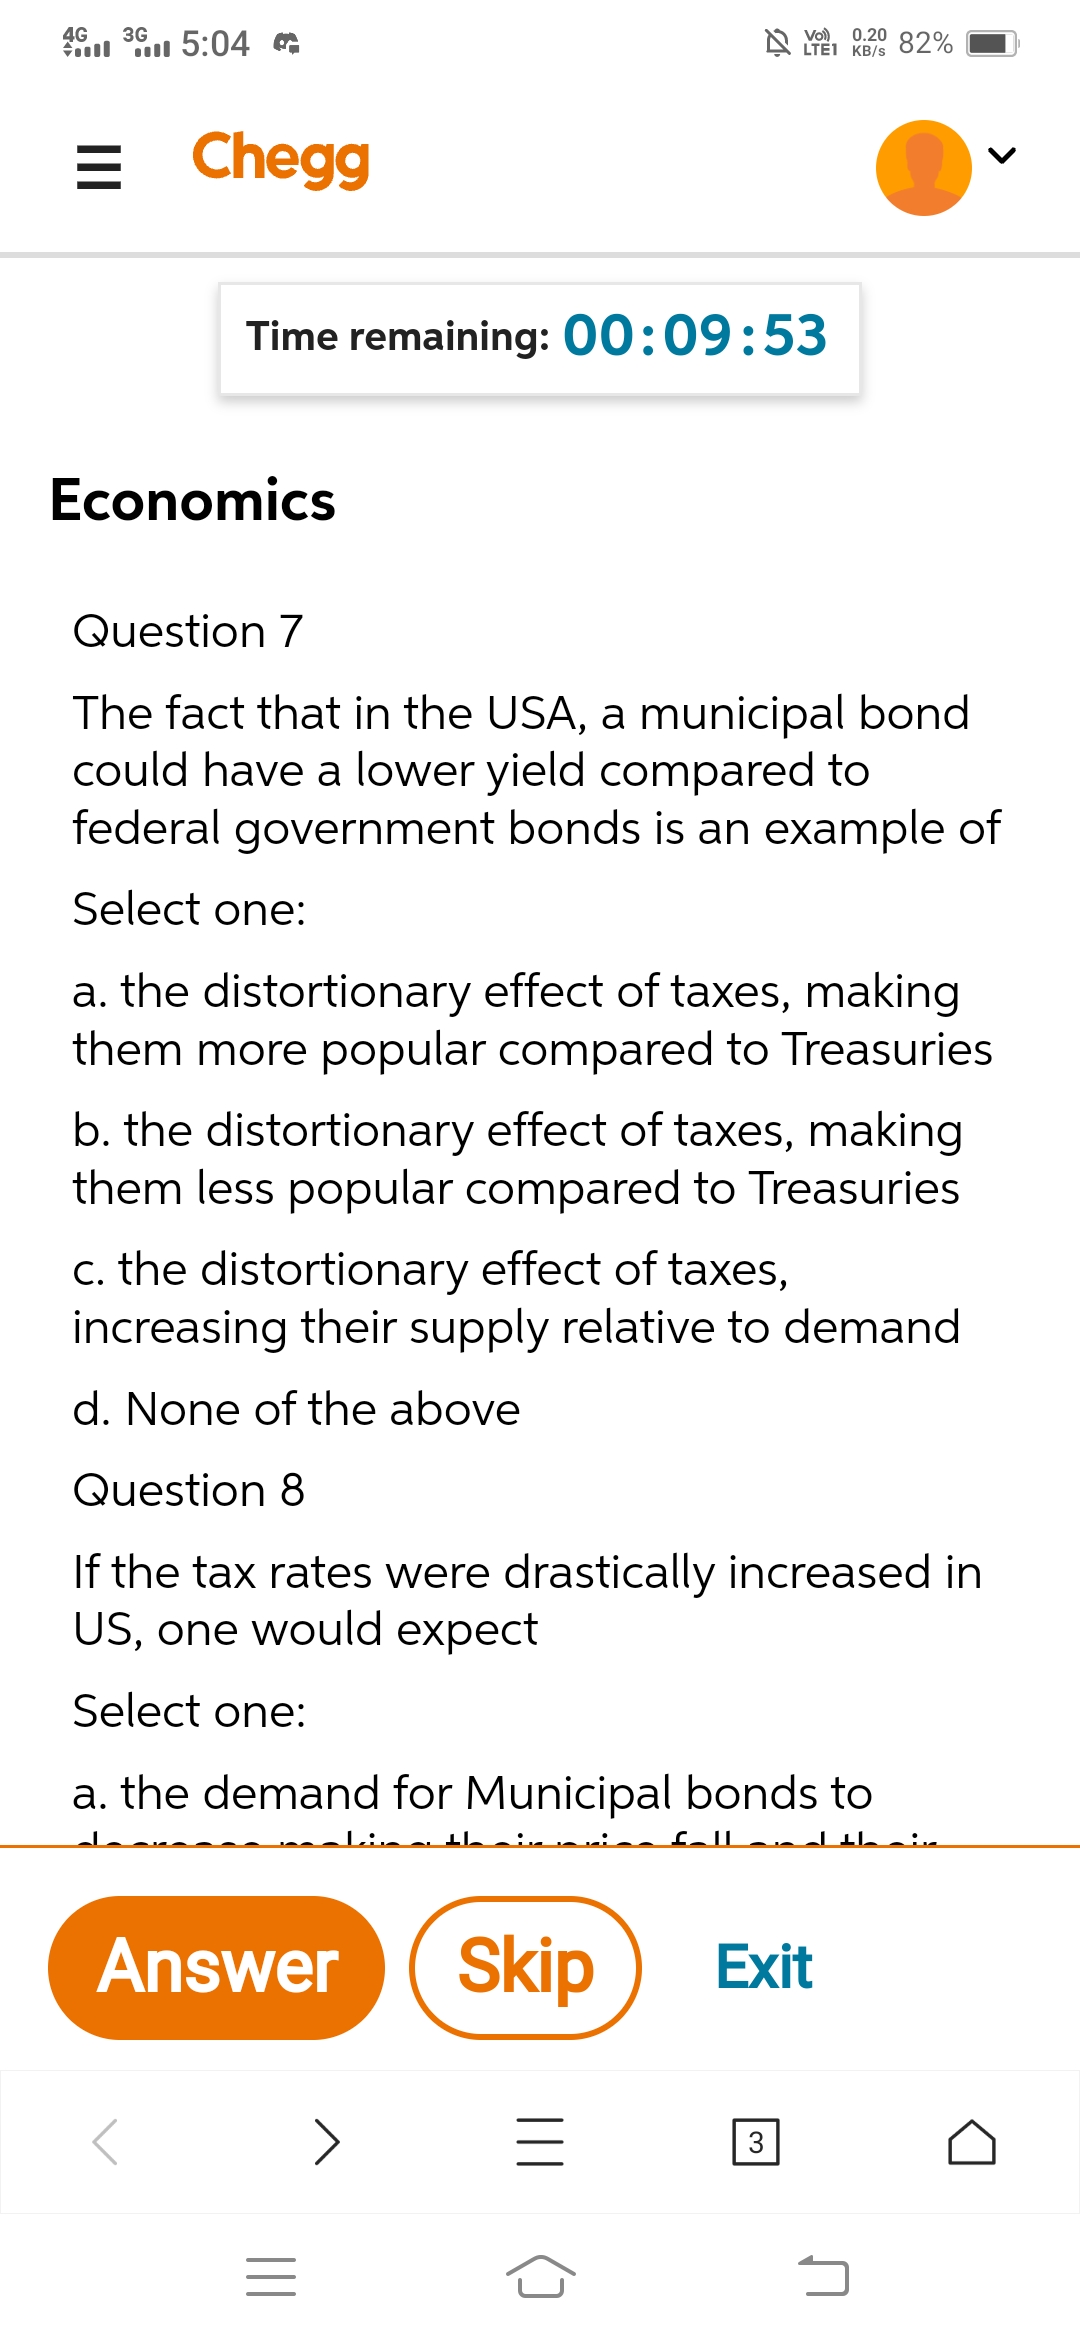 4G
al l 5:04 &
0.20 82%
3G
Vo)
A LTEI KB/s
= Chegg
Time remaining: 00:09:53
Economics
Question 7
The fact that in the USA, a municipal bond
could have a lower yield compared to
federal government bonds is an example of
Select one:
a. the distortionary effect of taxes, making
them more popular compared to Treasuries
b. the distortionary effect of taxes, making
them less popular compared to Treasuries
c. the distortionary effect of taxes,
increasing their supply relative to demand
d. None of the above
Question 8
If the tax rates were drastically increased in
US, one would expect
Select one:
a. the demand for Municipal bonds to
fallan d thein
Answer
Skip
Exit
3
||
